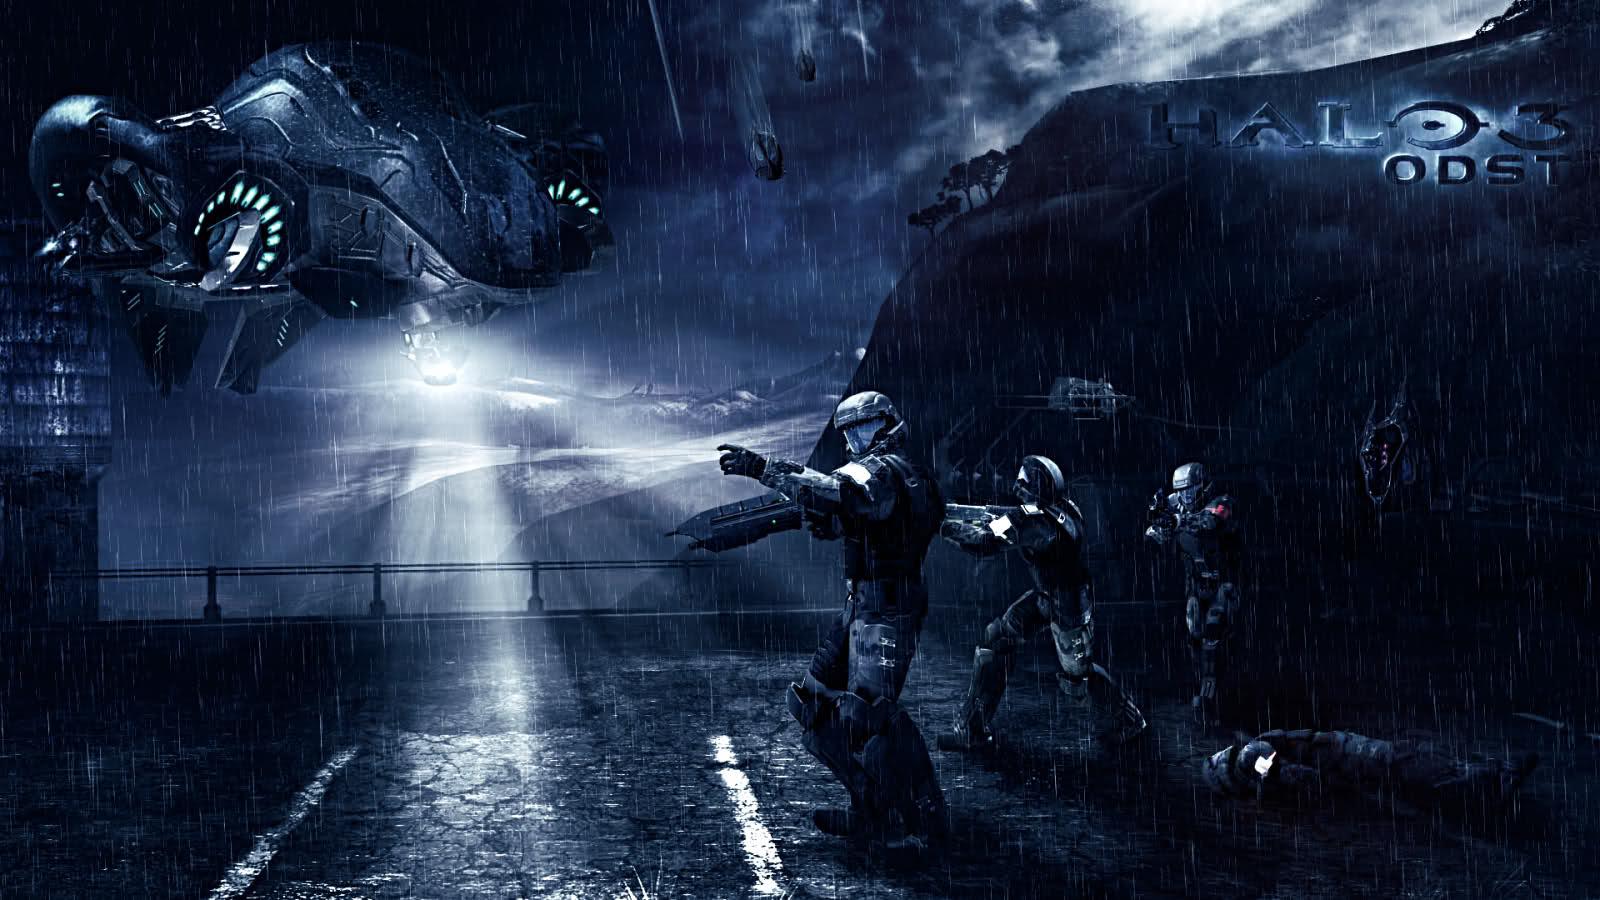 Halo 3 Wallpapers HD - Wallpaper Cave